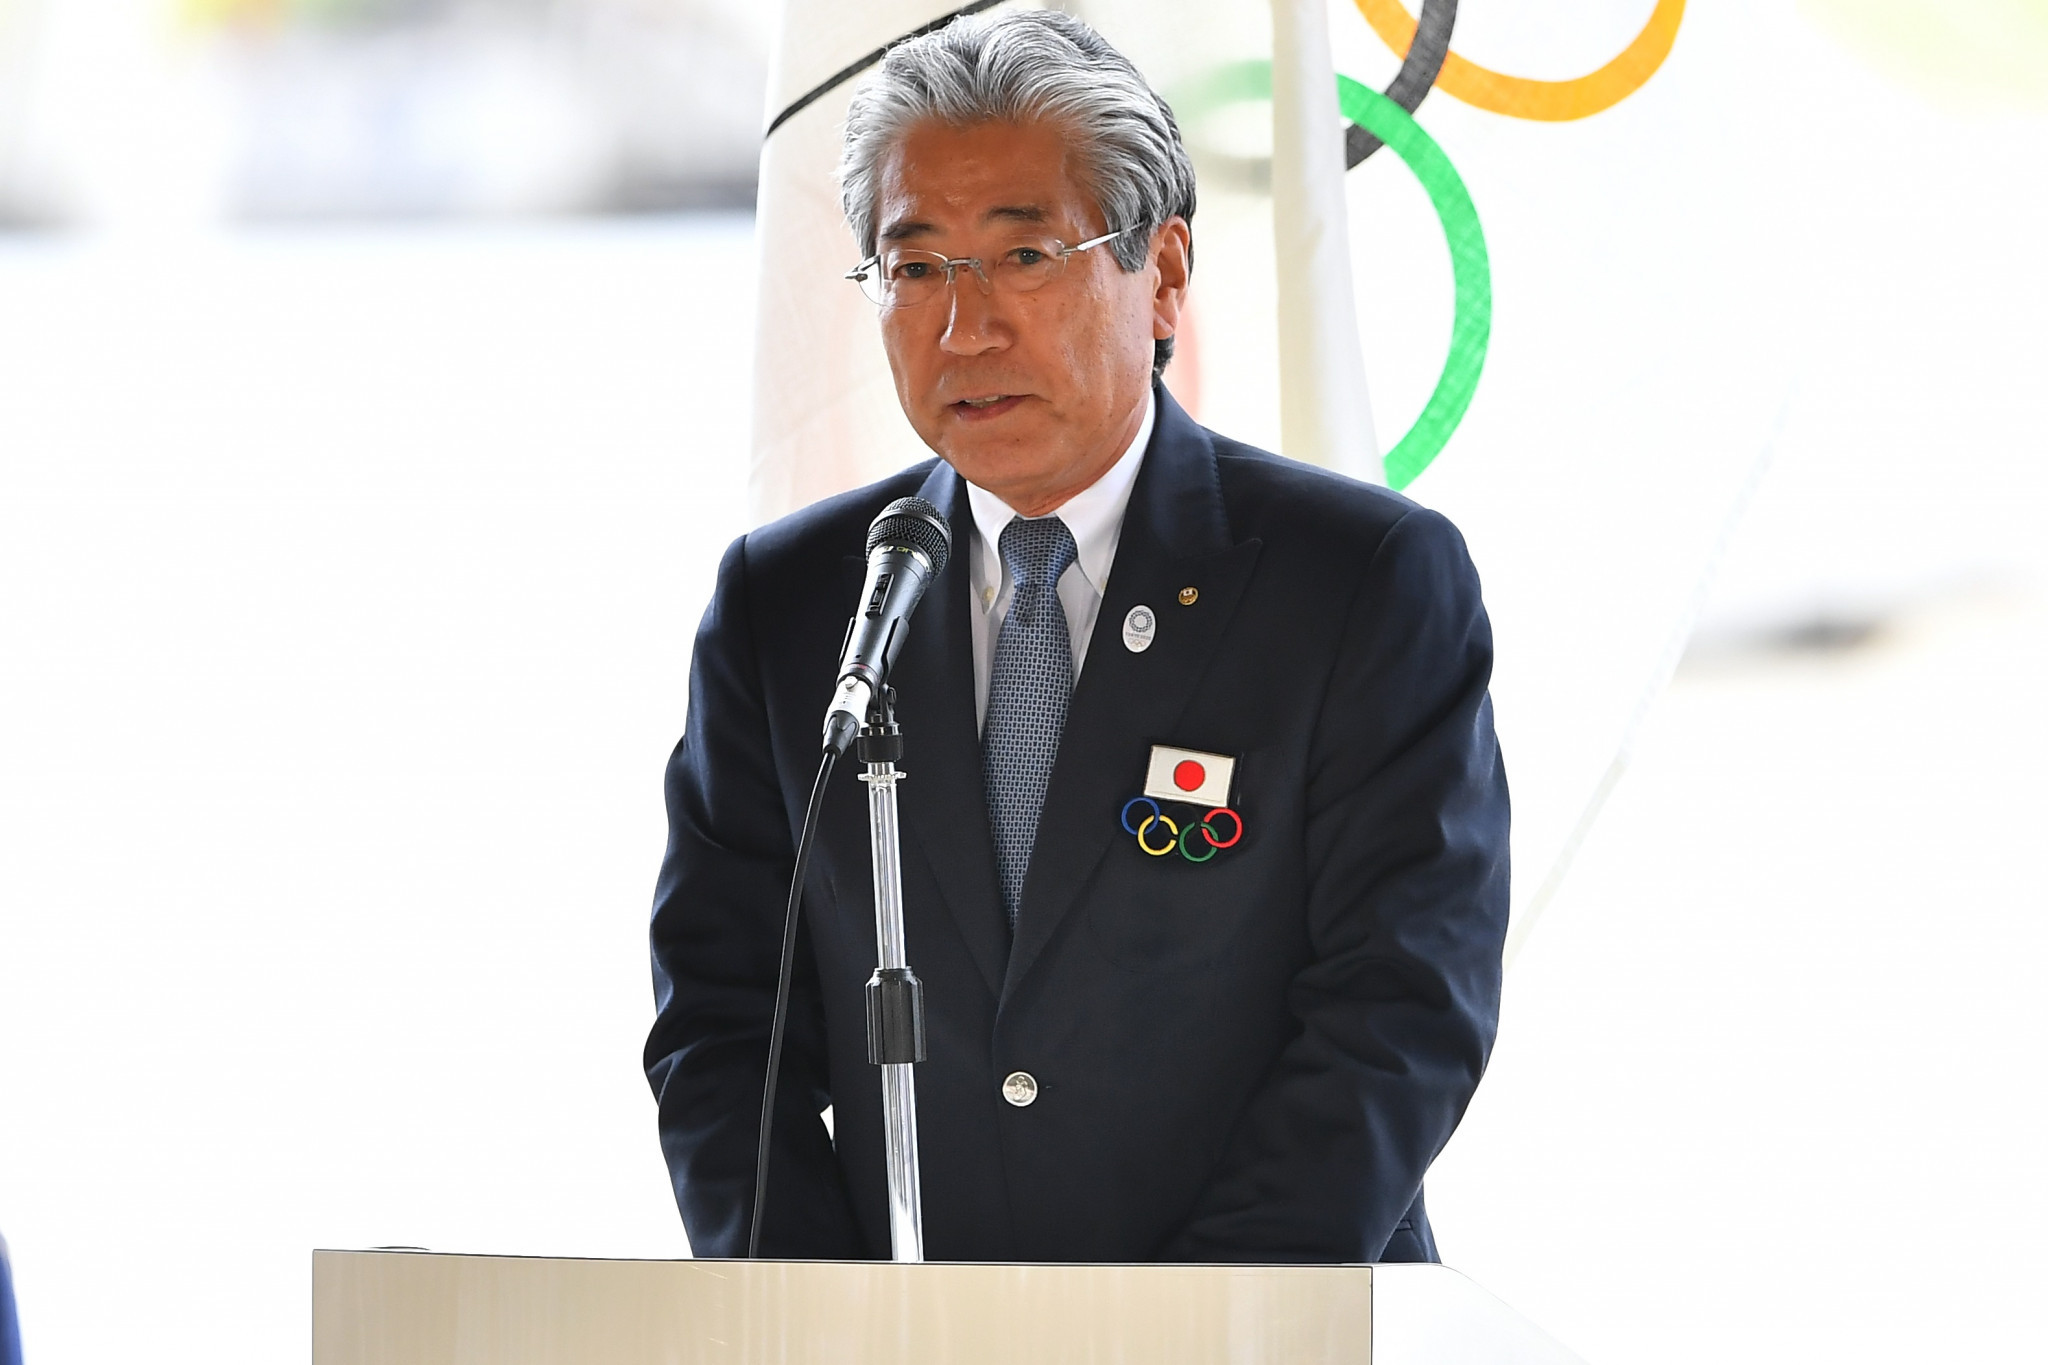 Tsunekazu Takeda has been the President of the Japanese Olympic Committee since 2001 ©Getty Images